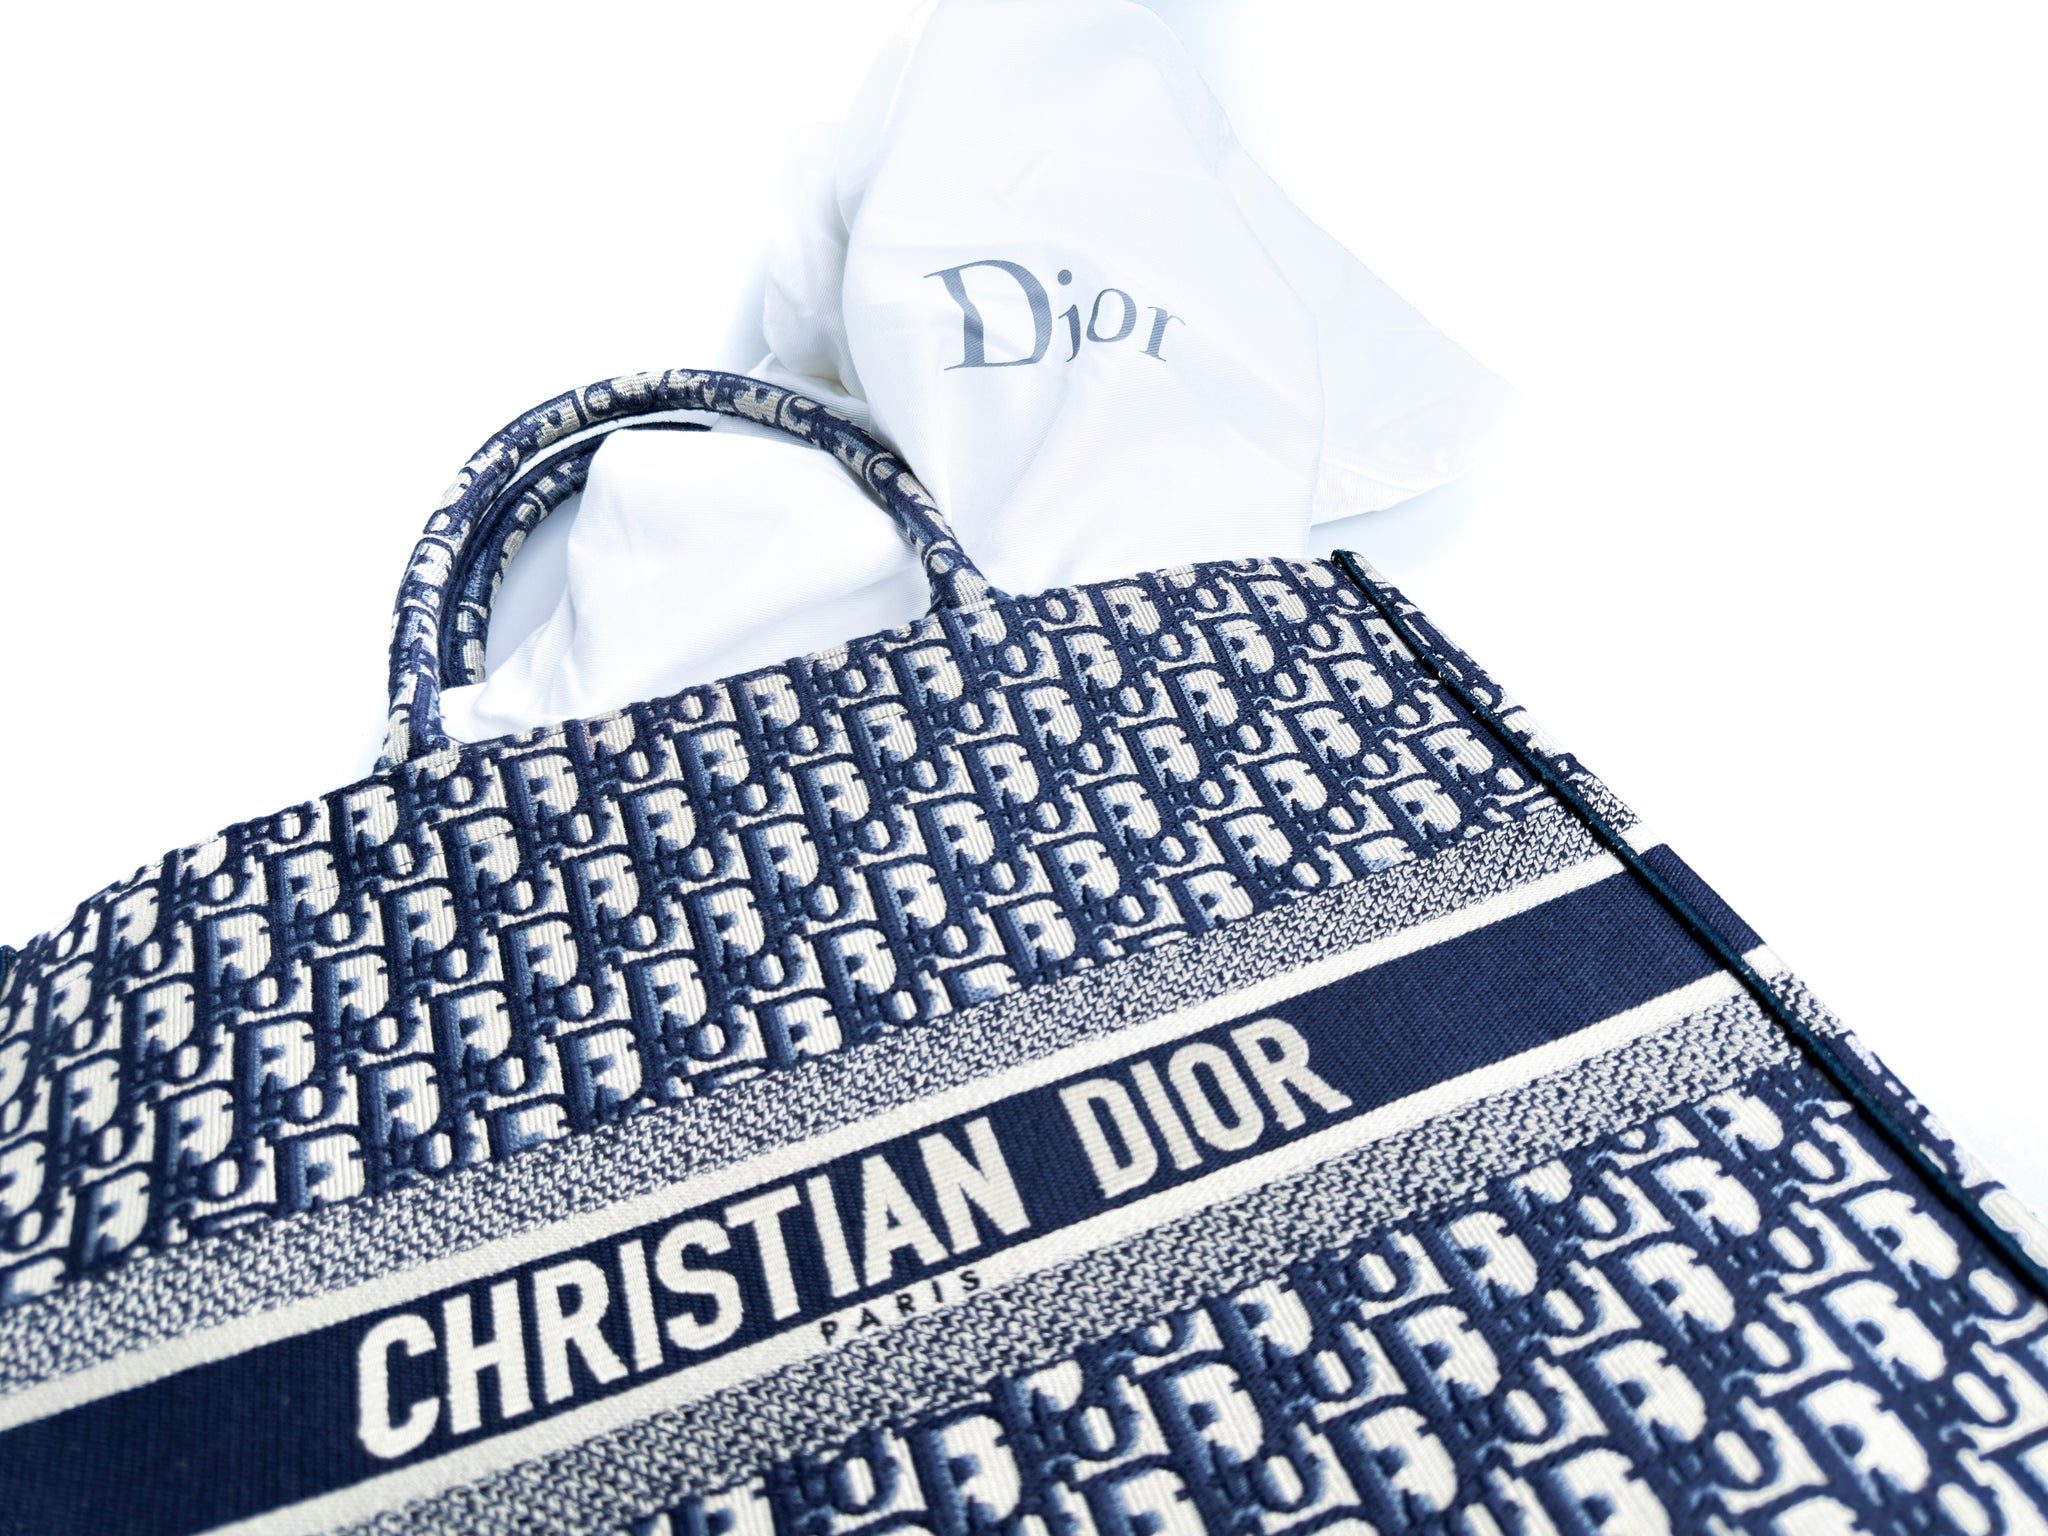 Large Dior Book Tote With Name Tag Charm - Dior Oblique motif